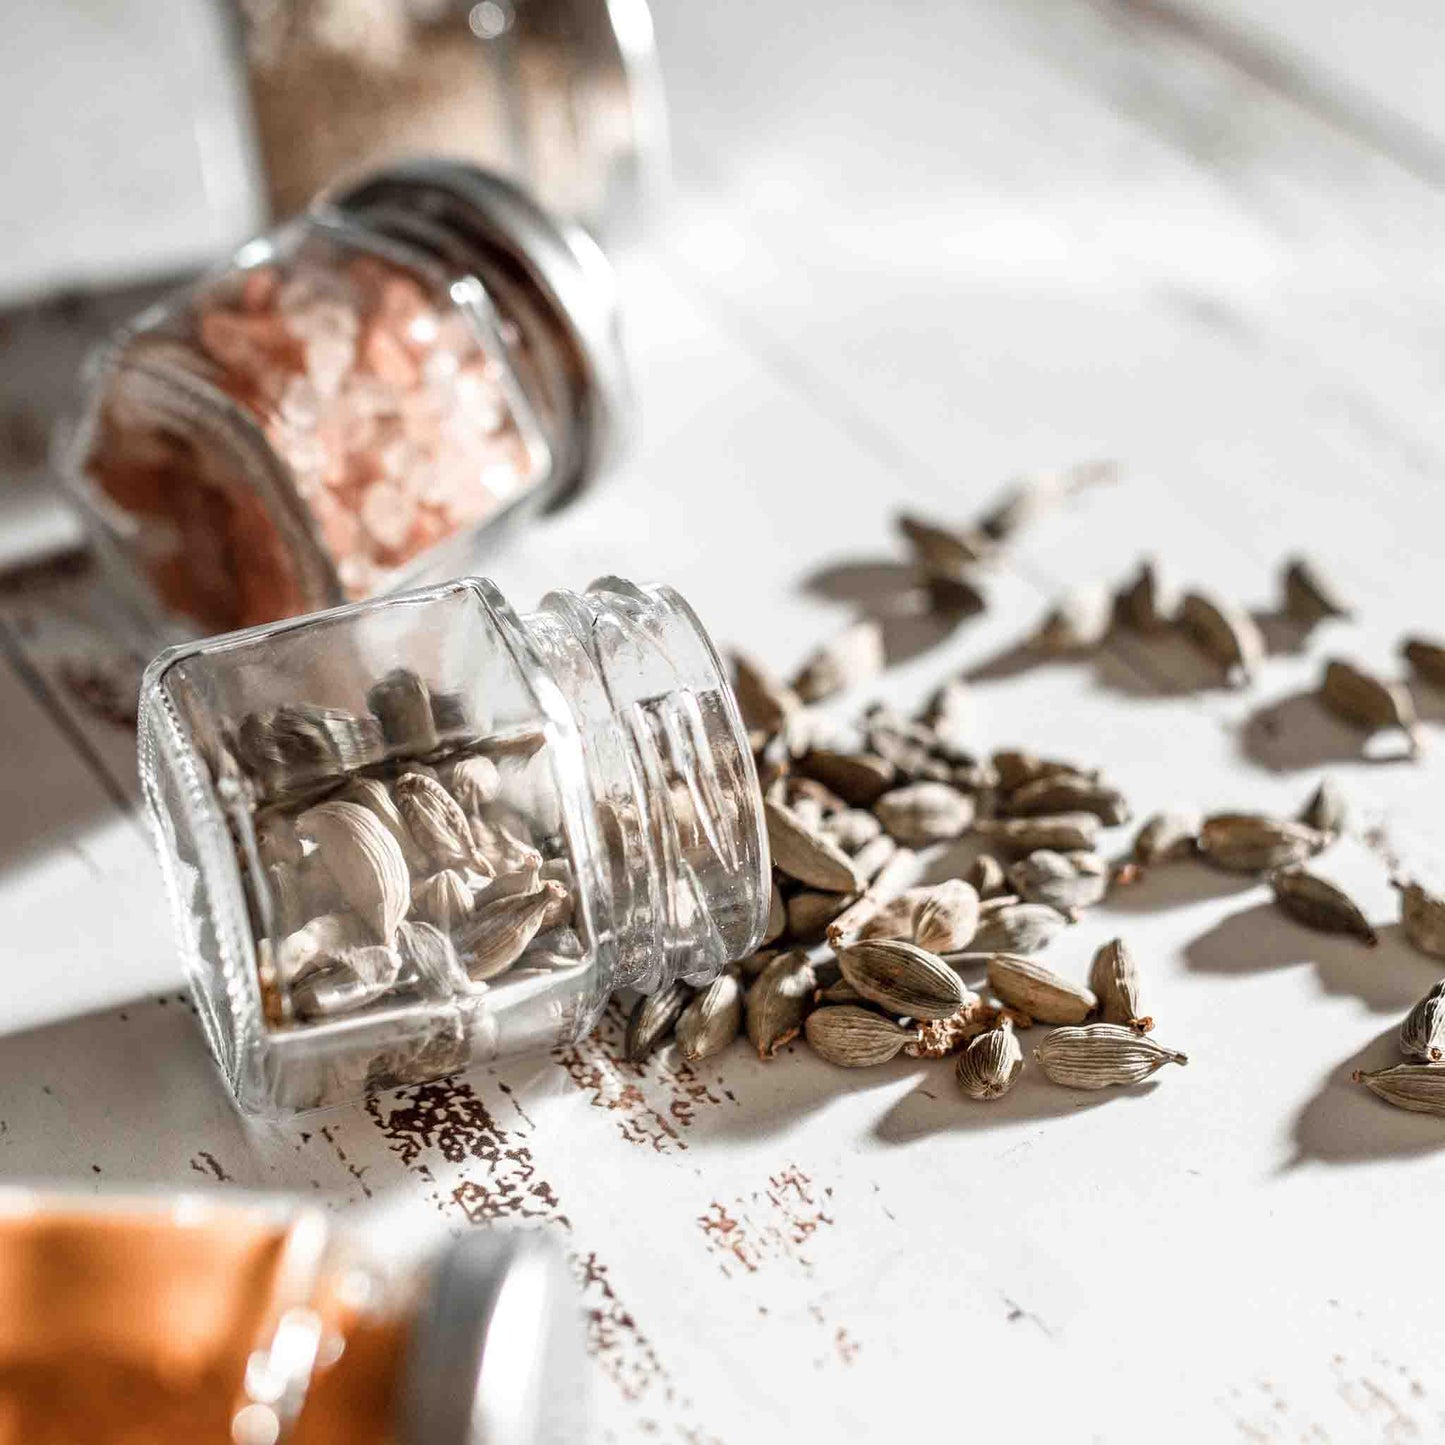 Three magnetic spice jars tipped over, with one open and showing cardamom seeds falling out